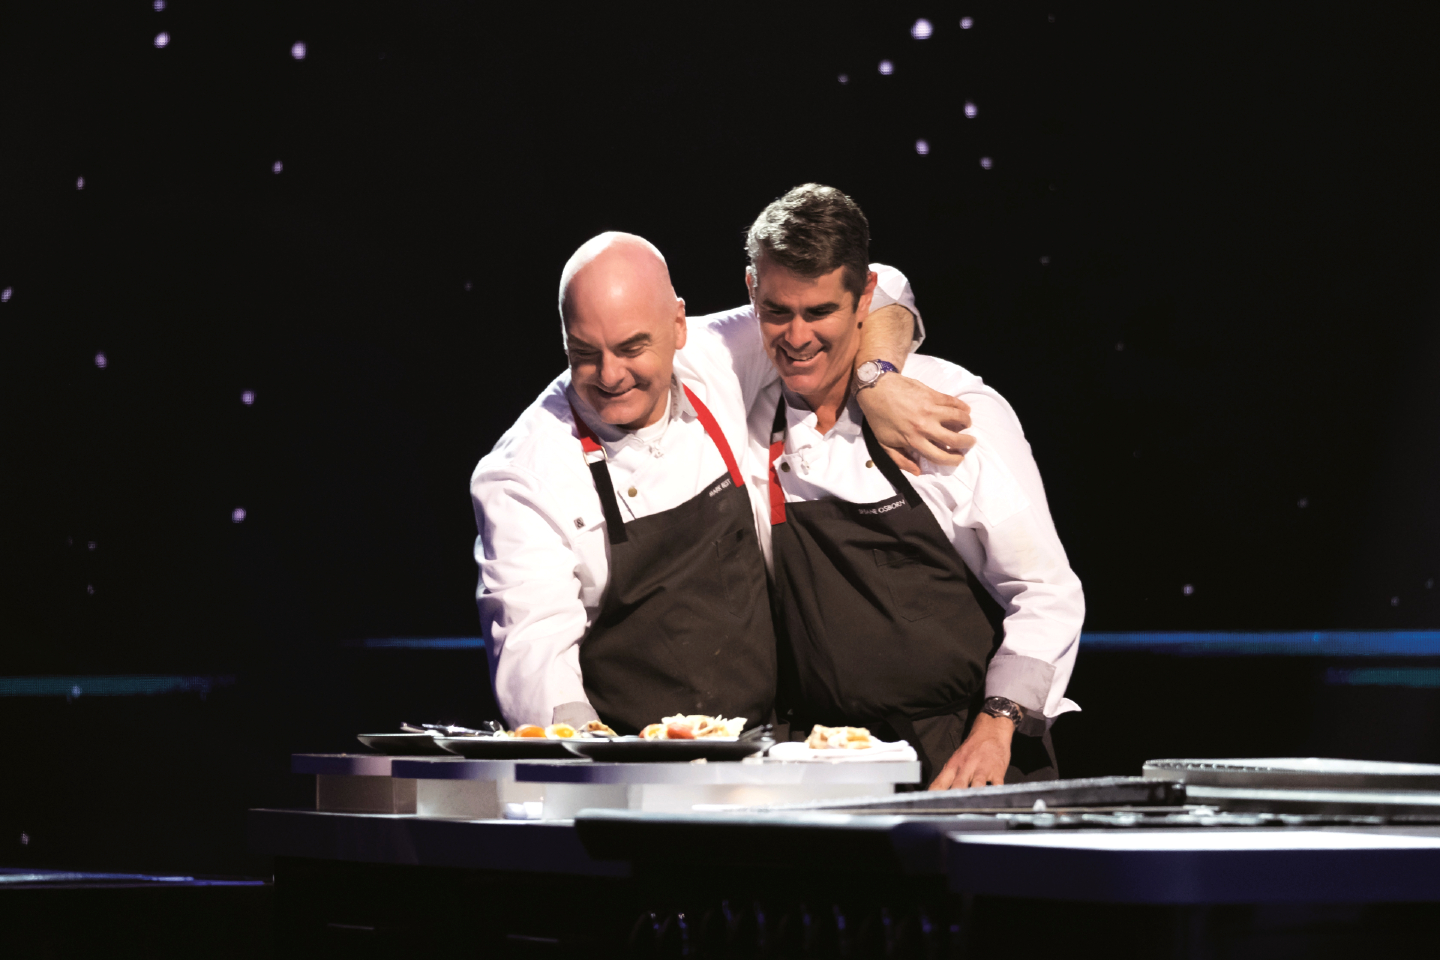 Disturbance Briefcase Treaty Aussie chefs Mark Best and Shane Osborn reveal exclusive behind-the-scenes  insights into 'The Final Table' | Options, The Edge